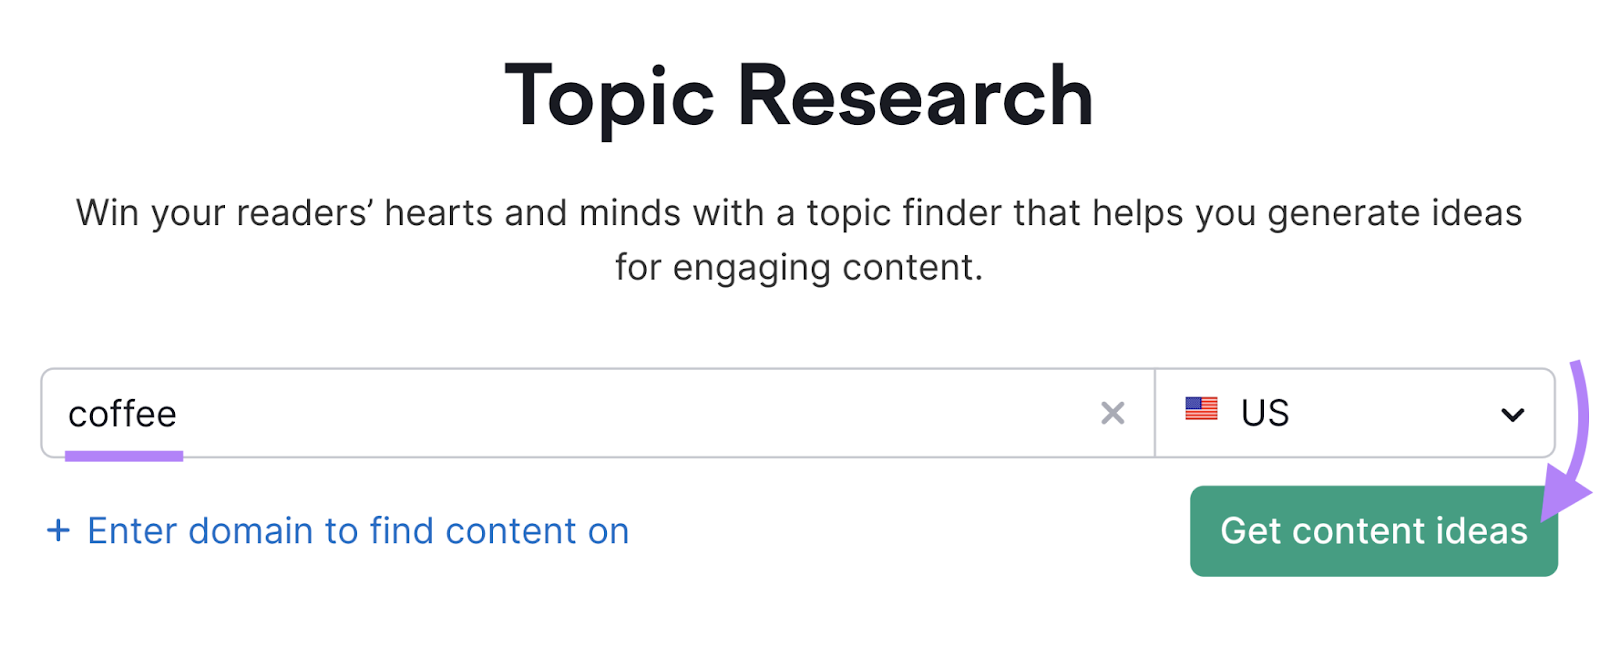 "coffee" entered into Topic Research tool search bar